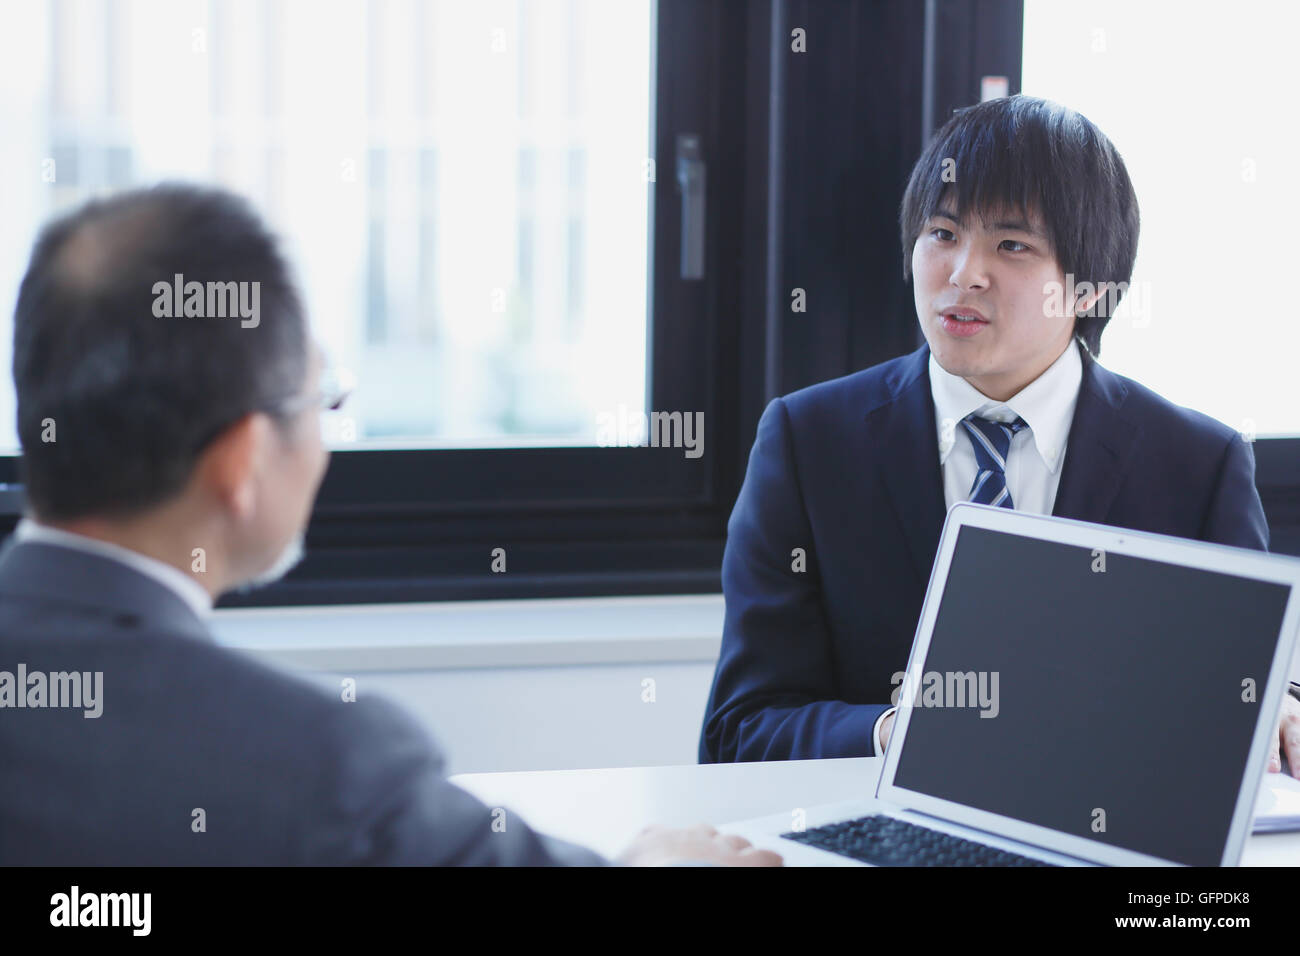 Japanese businesspeople in a modern office Stock Photo